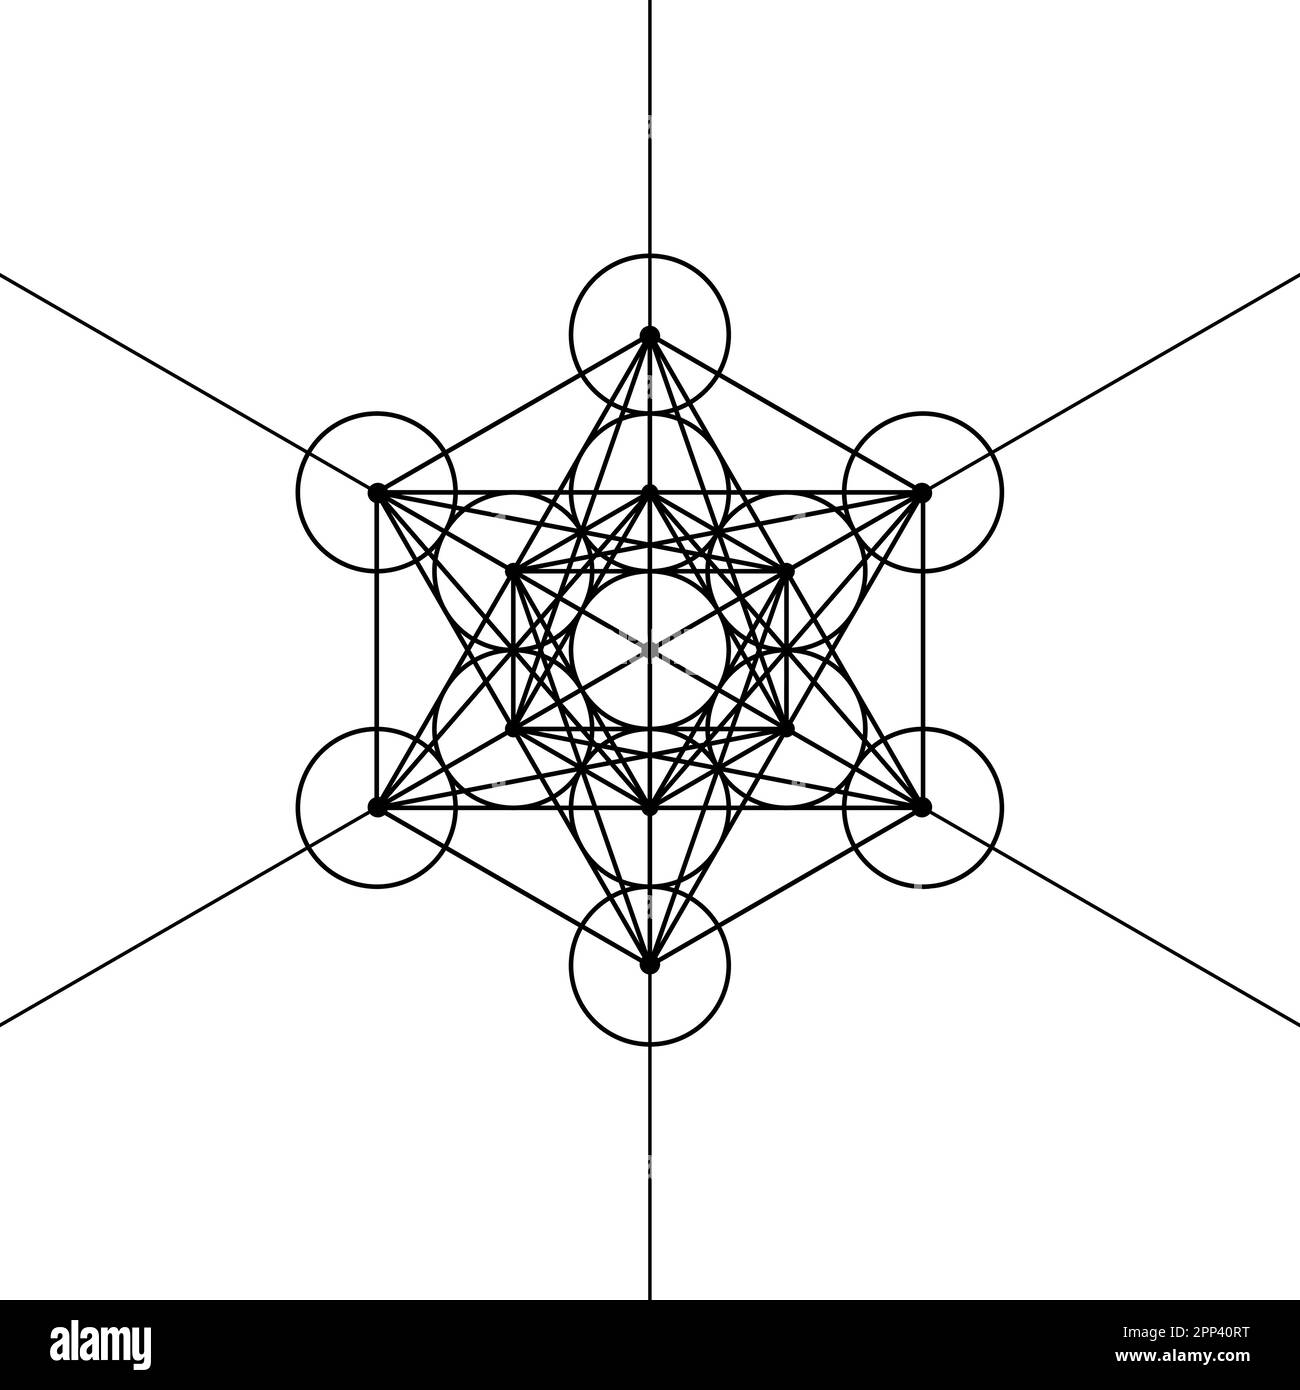 Metatrons Cube,  Flower of Life. Sacred geometry, graphic element Vector isolated Illustration. Mystic icon platonic solids, abstract geometric drawin Stock Vector